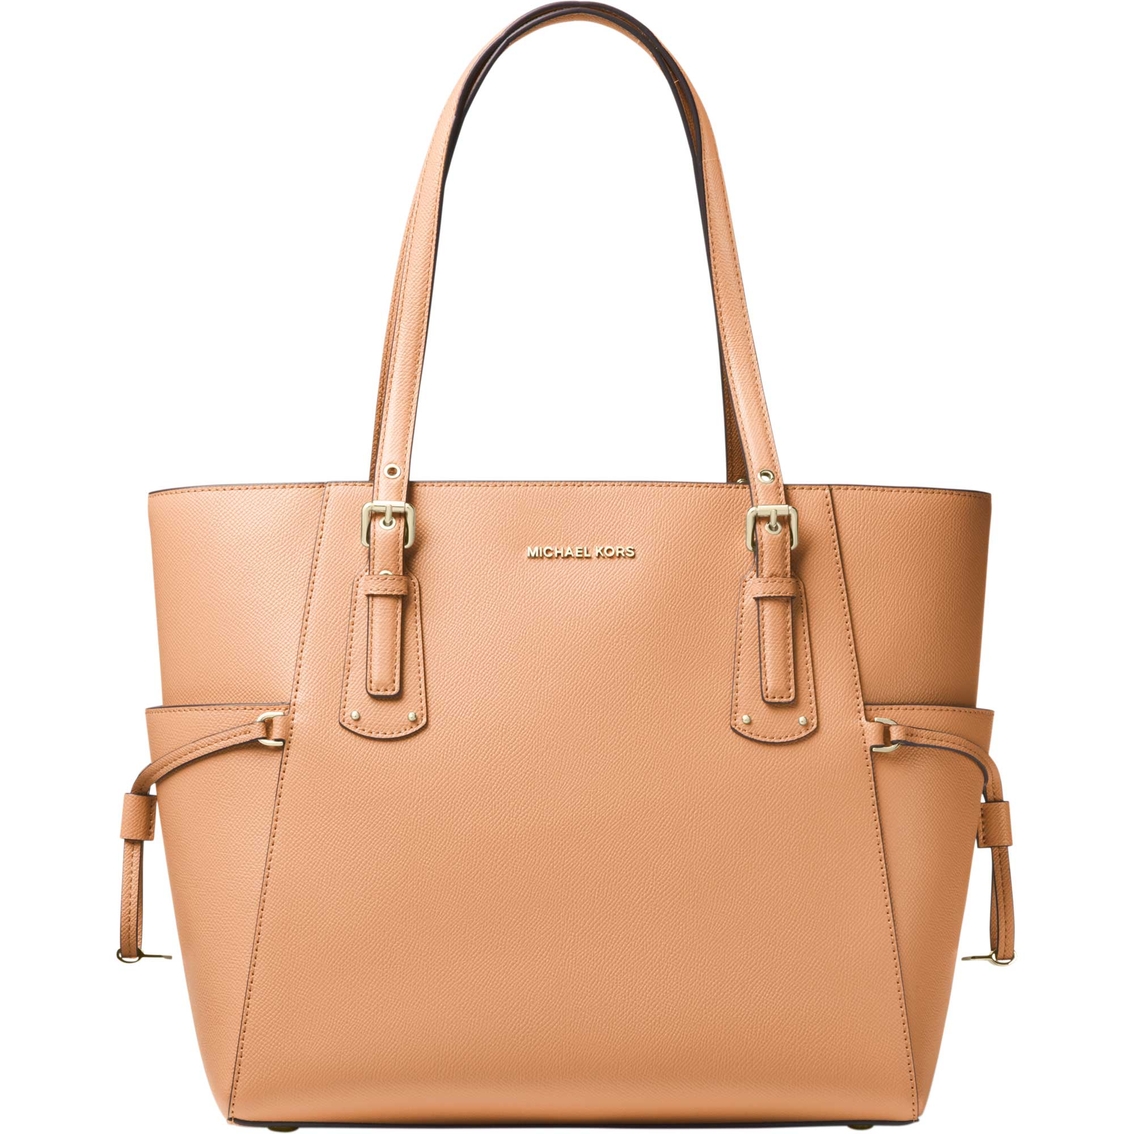 Michael Kors Voyager East West Tote Bag | Totes & Shoppers | Clothing ...